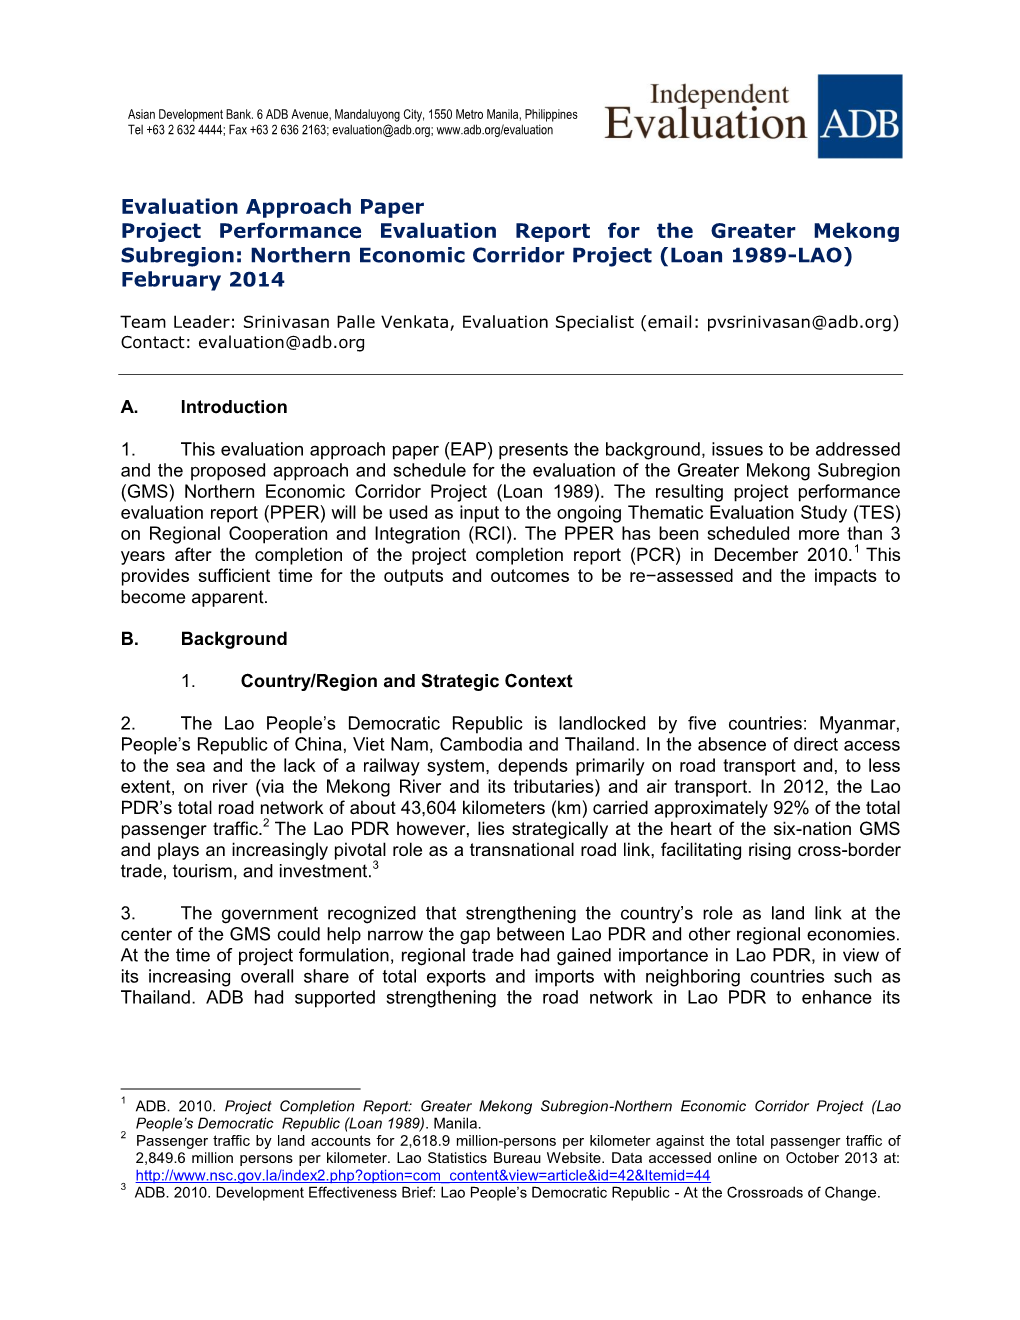 Evaluation Approach Paper Project Performance Evaluation Report for the Greater Mekong Subregion: Northern Economic Corridor Project (Loan 1989-LAO) February 2014